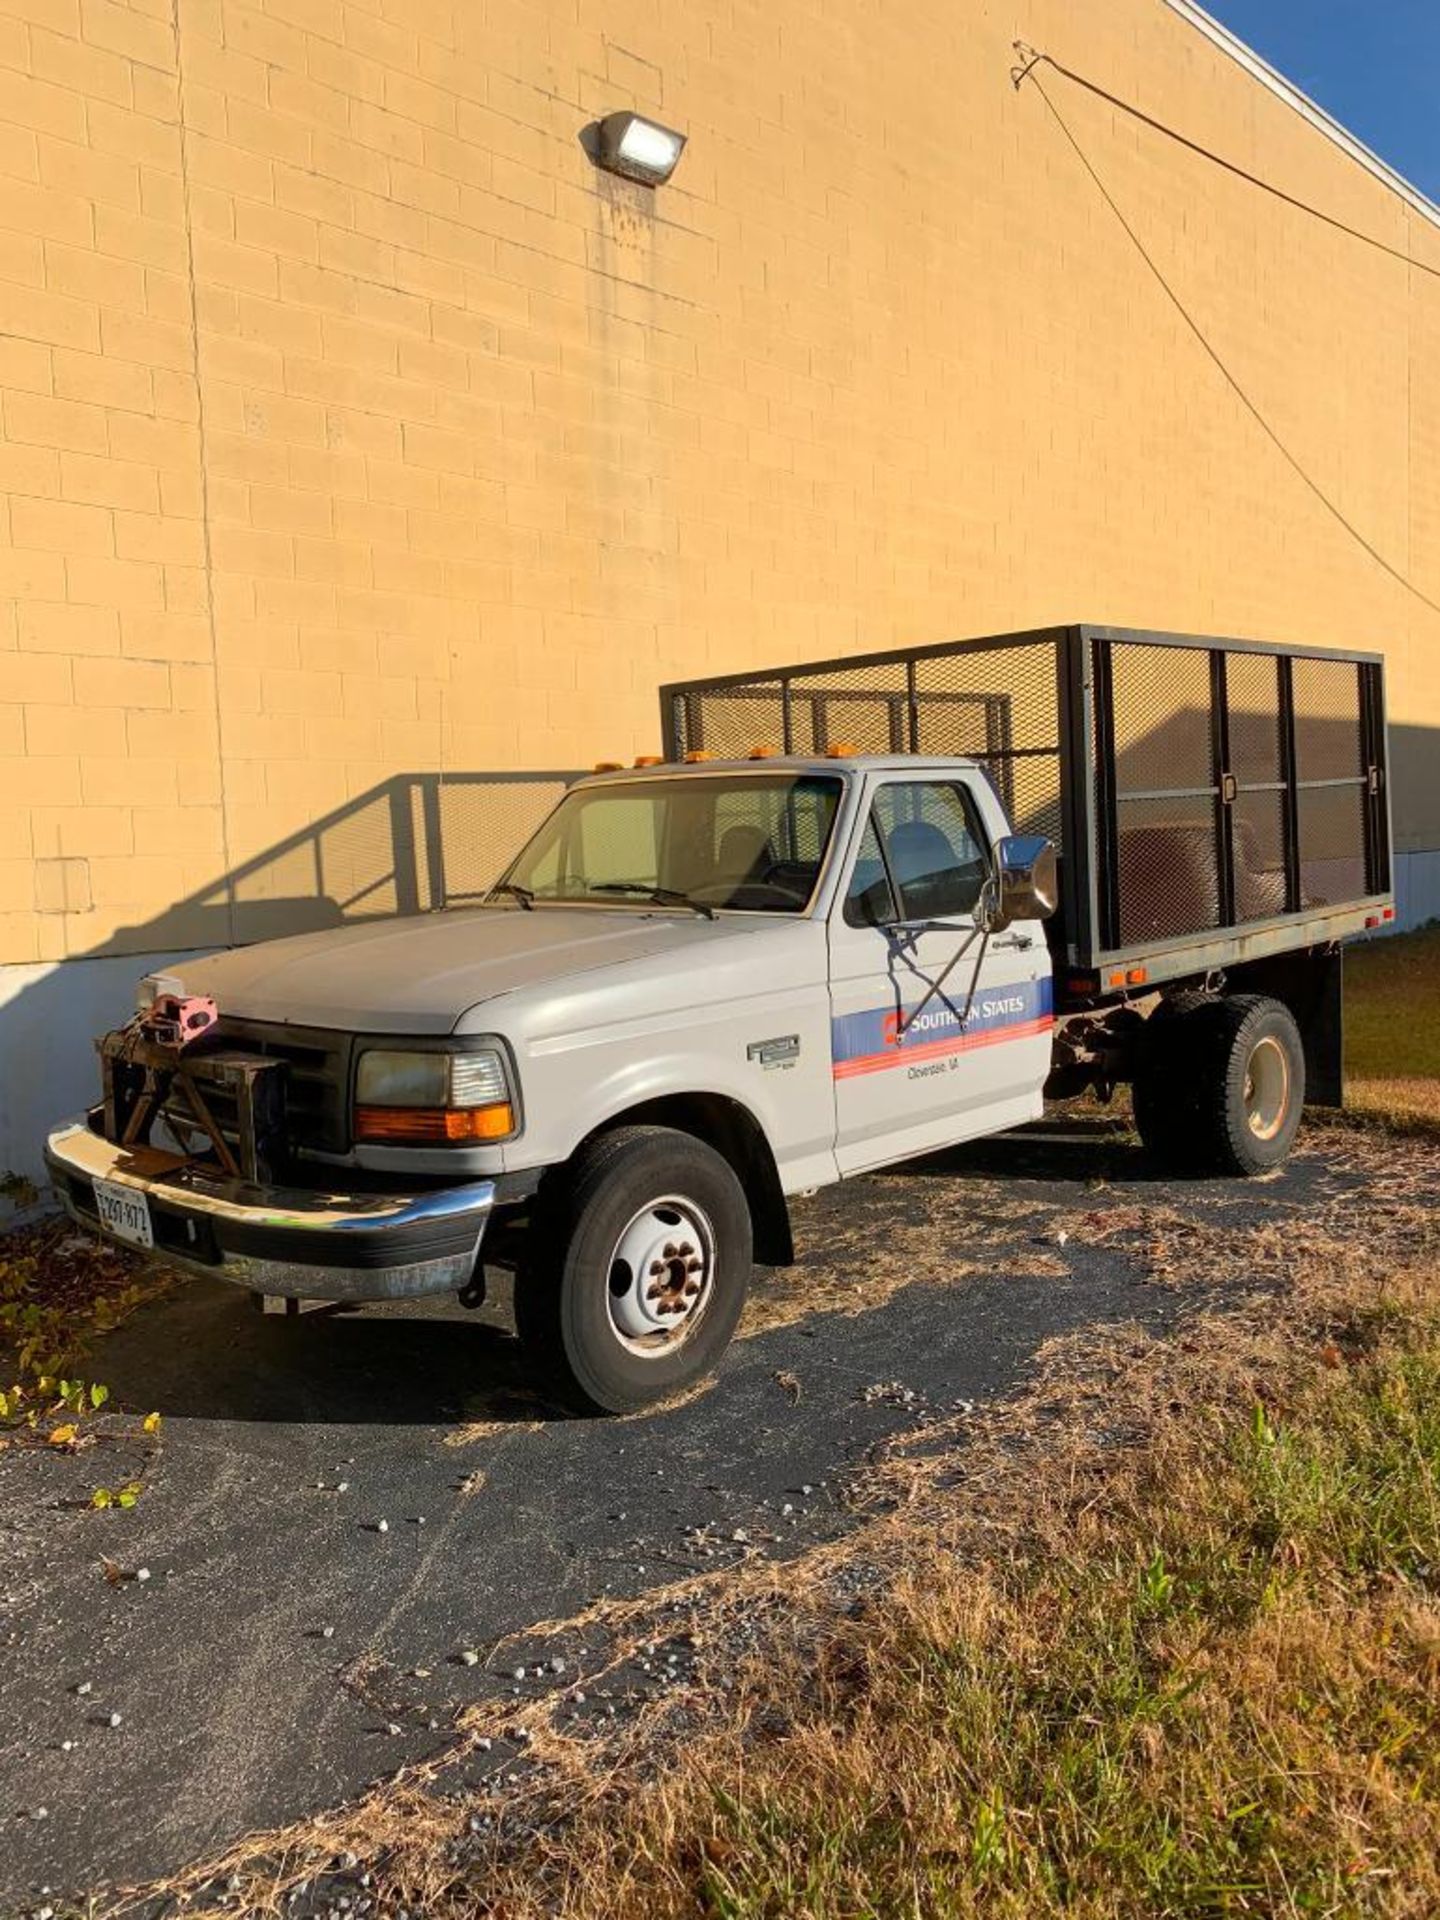 1998 Ford F-350 Pickup Truck, Power Stroke Diesel, Stake Bed, Tandem Axle, w/ Wench, Manual Transmis